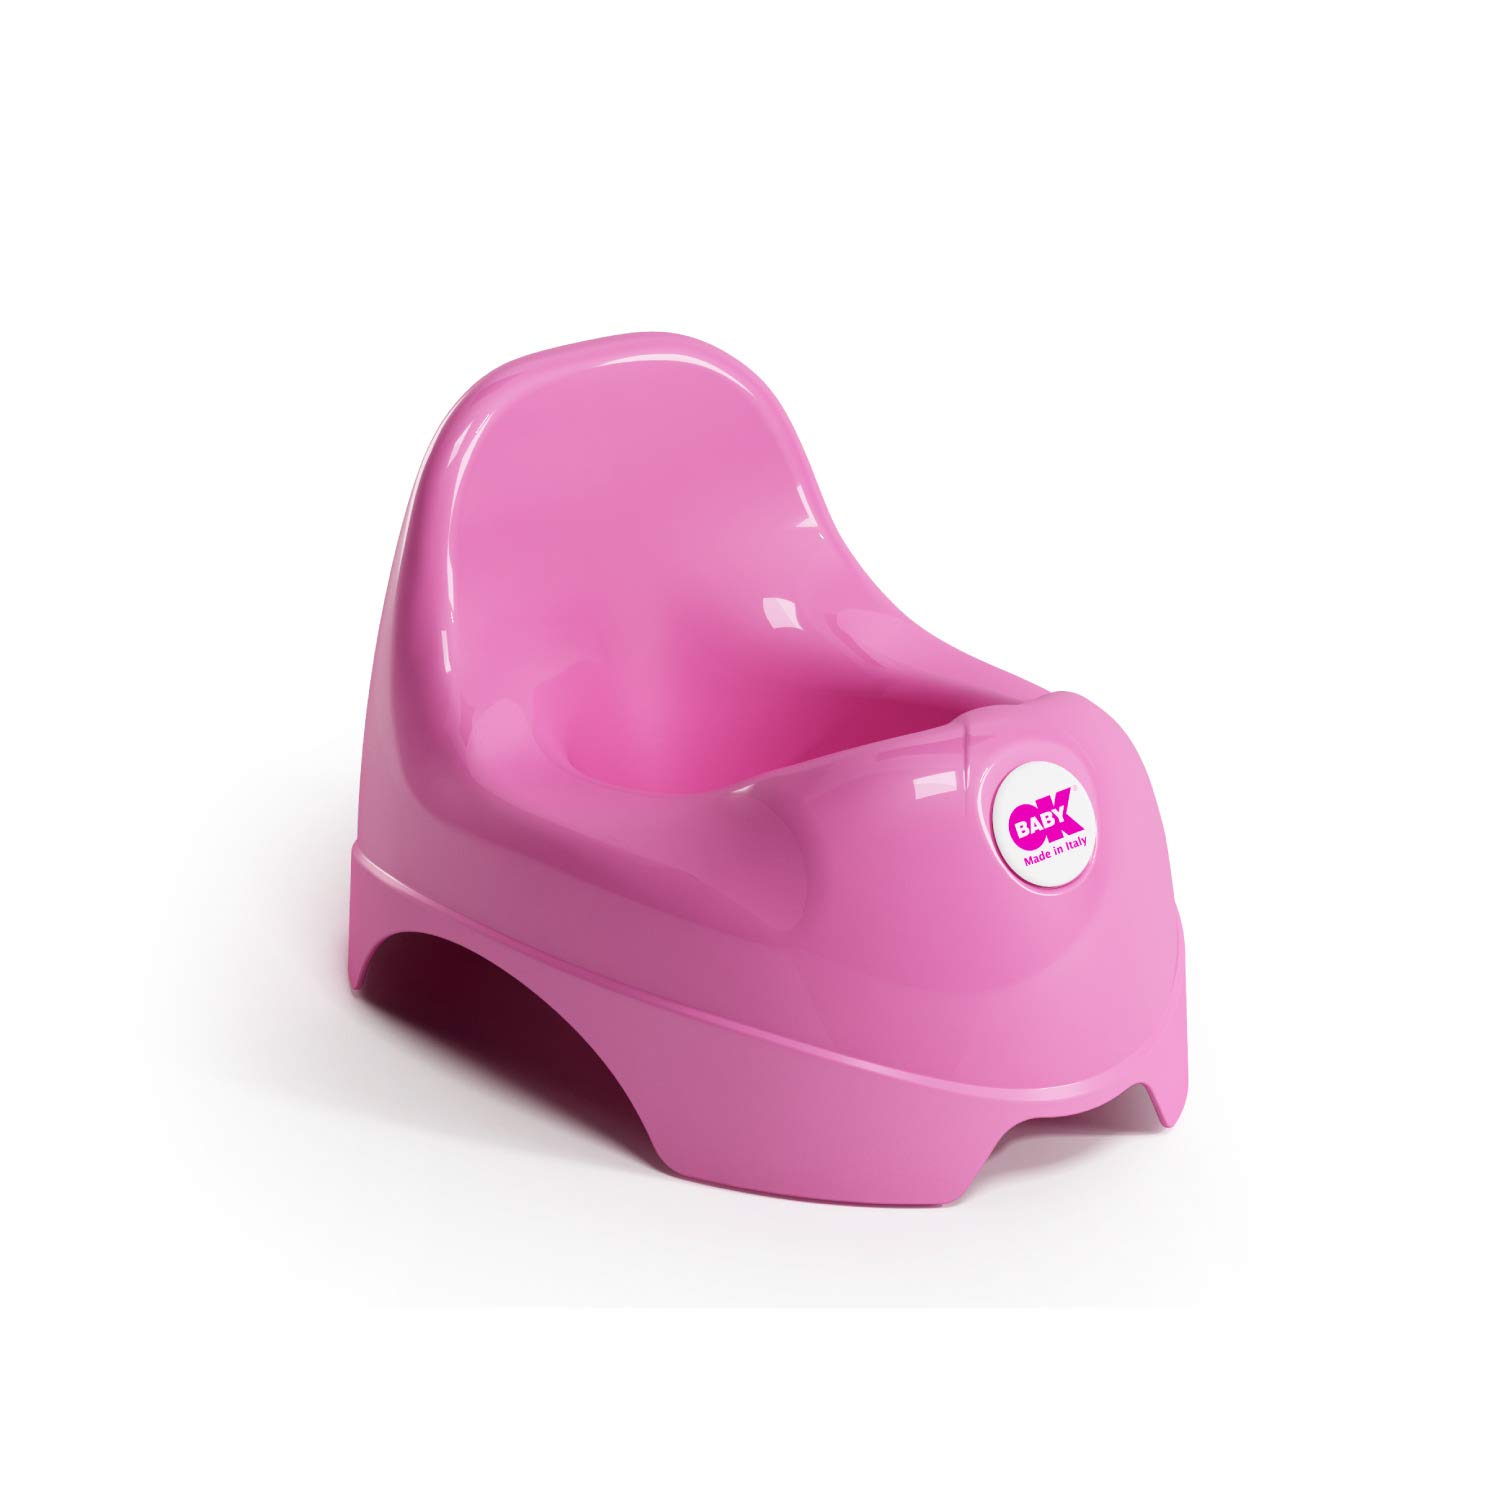 OKBABY Relax - Baby Potty with Ergonomic Seat and High Back - Pink